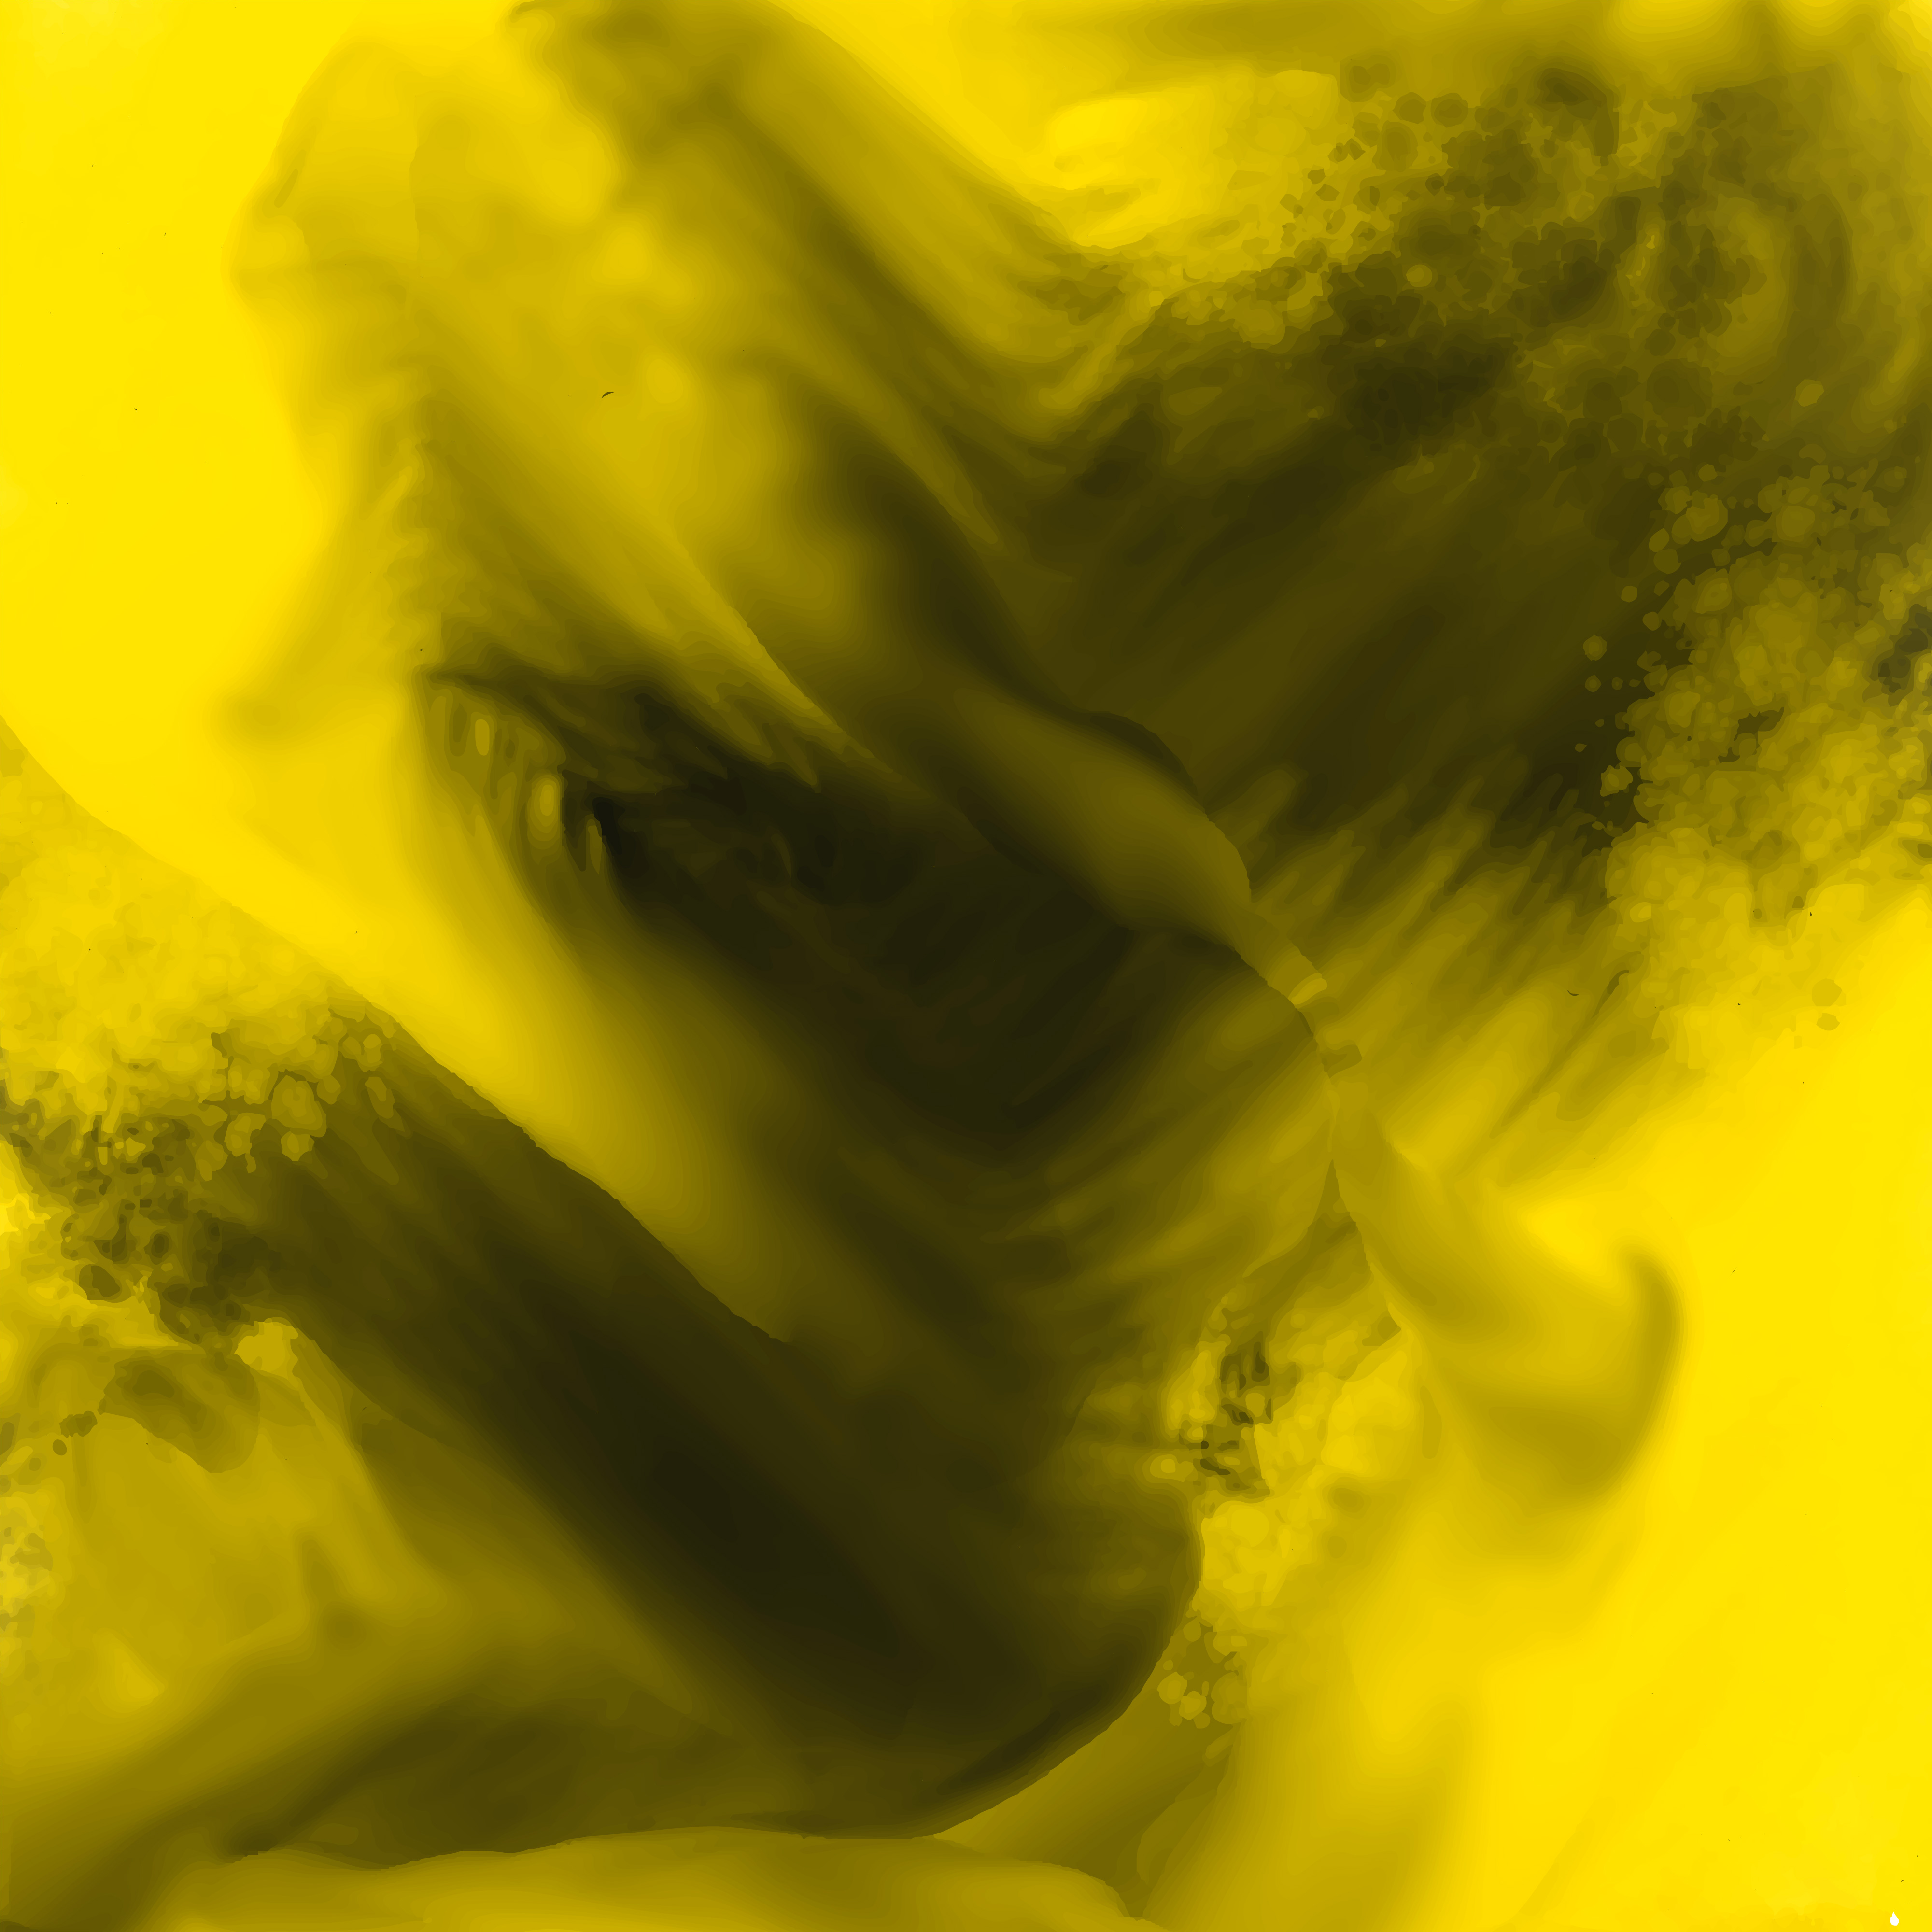 abstract yellow and black grunge style watercolor background - Download